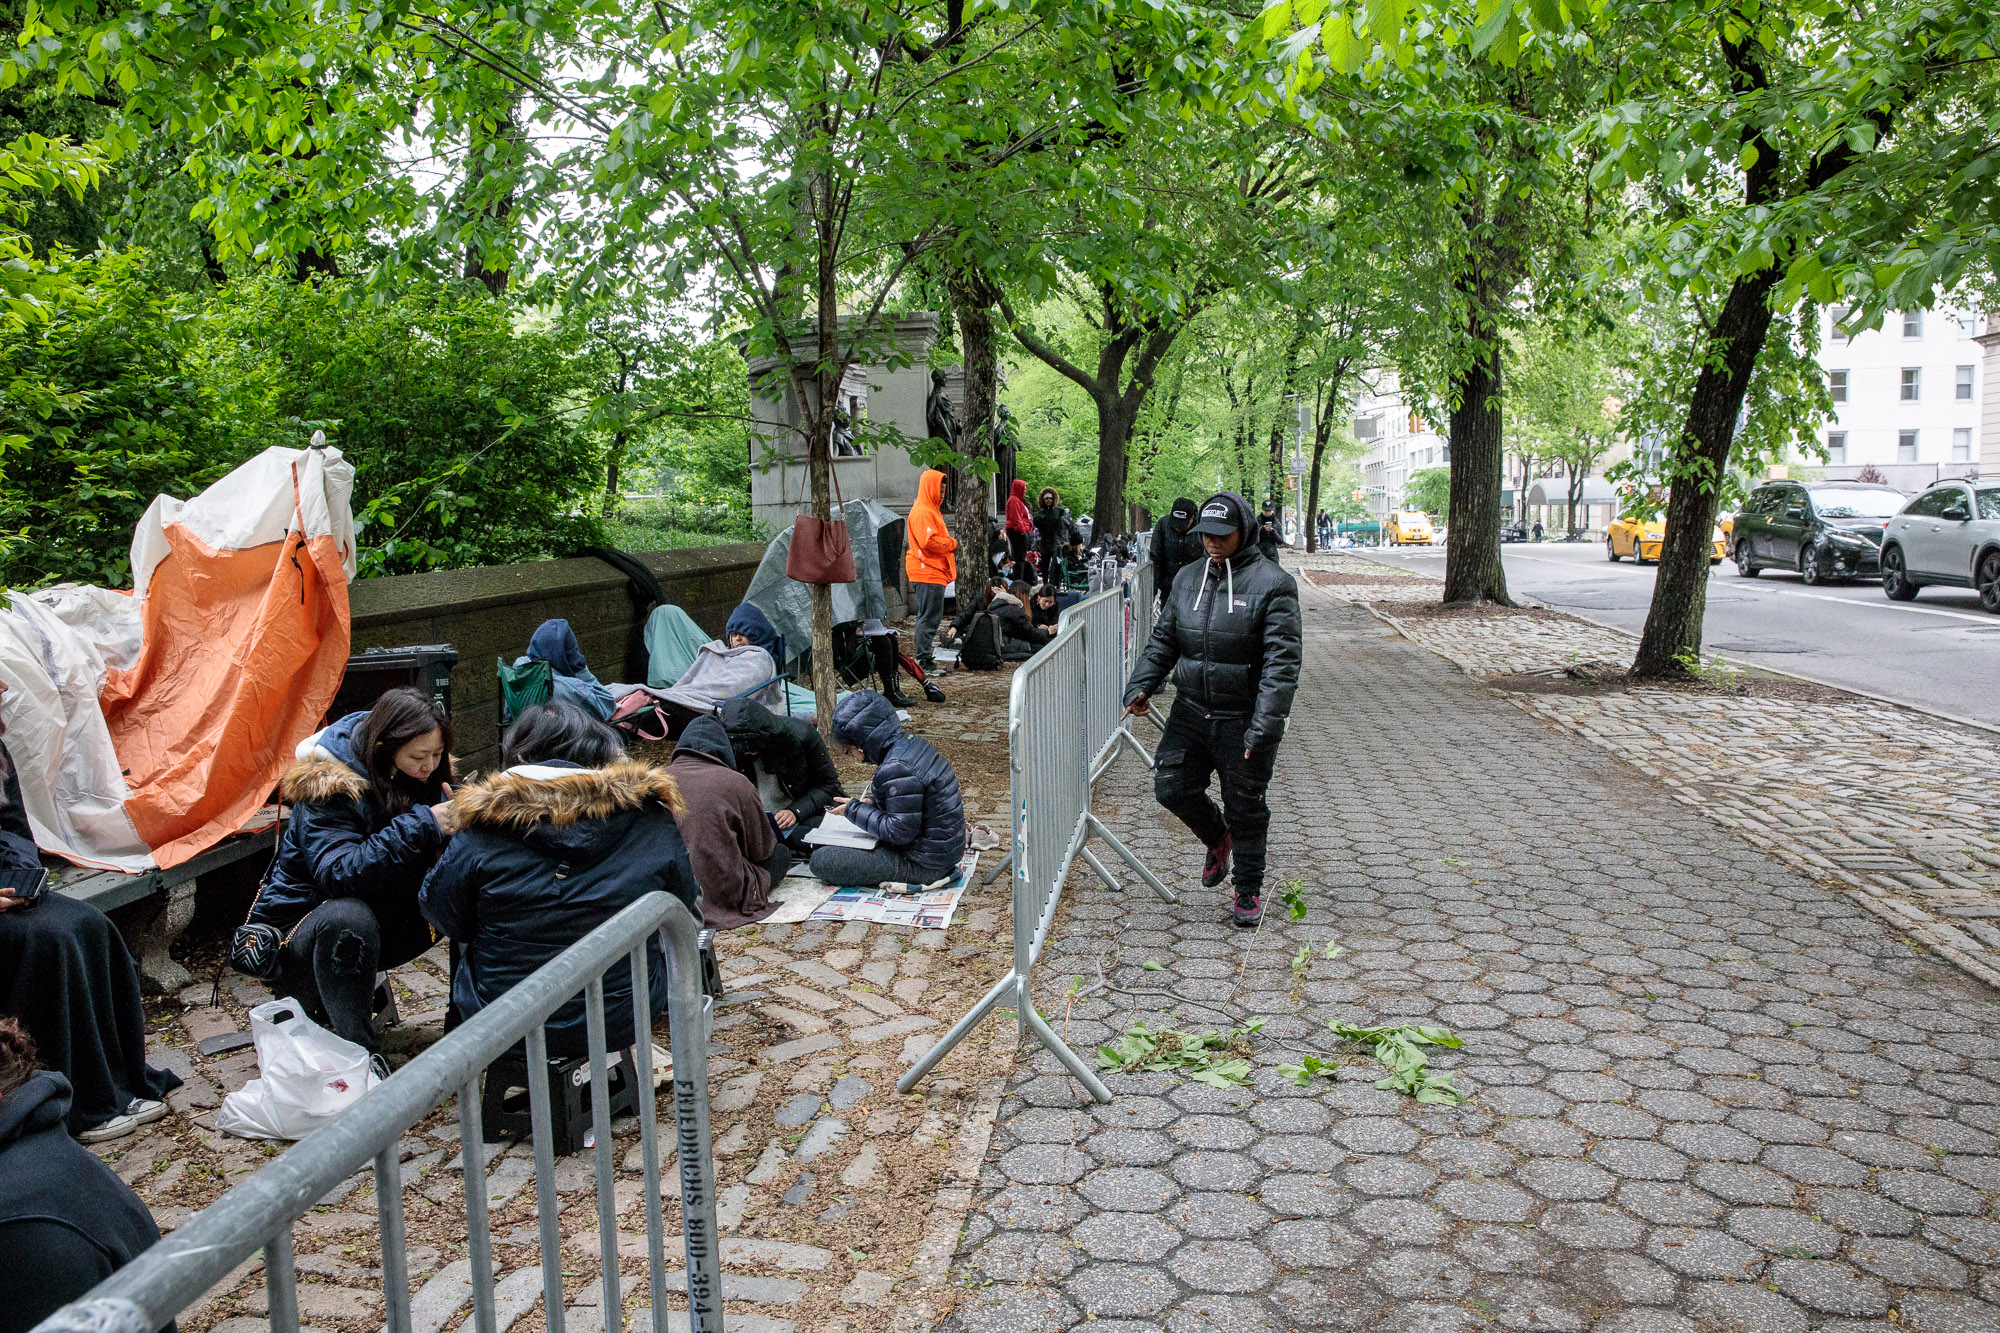 Throngs of BTS fans camp out days before Jungkook concert in Central Park